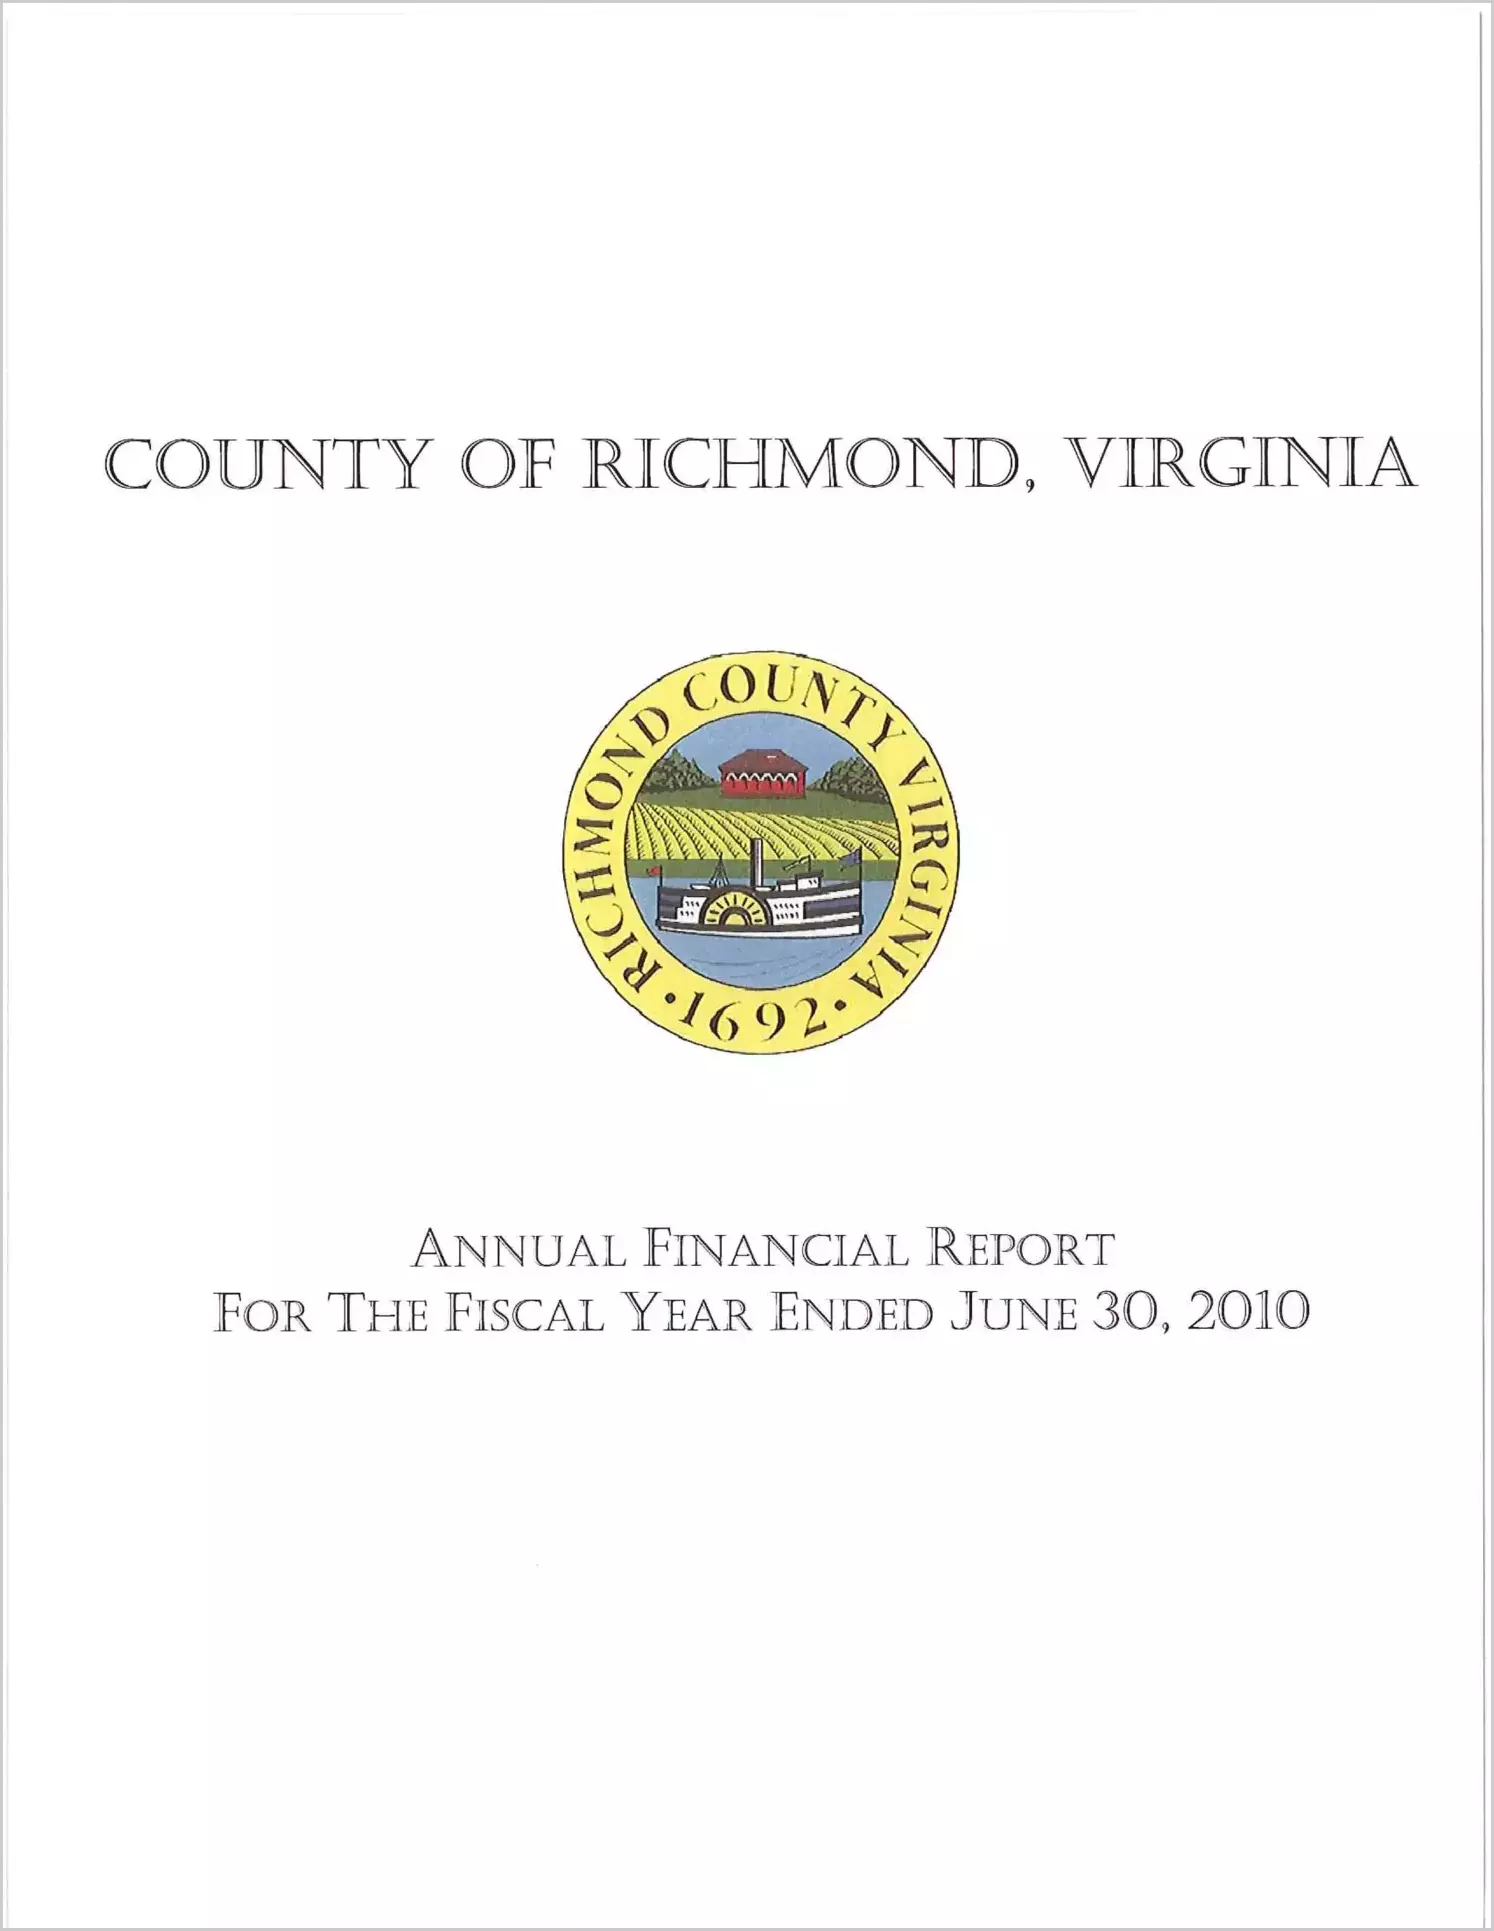 2010 Annual Financial Report for County of Richmond